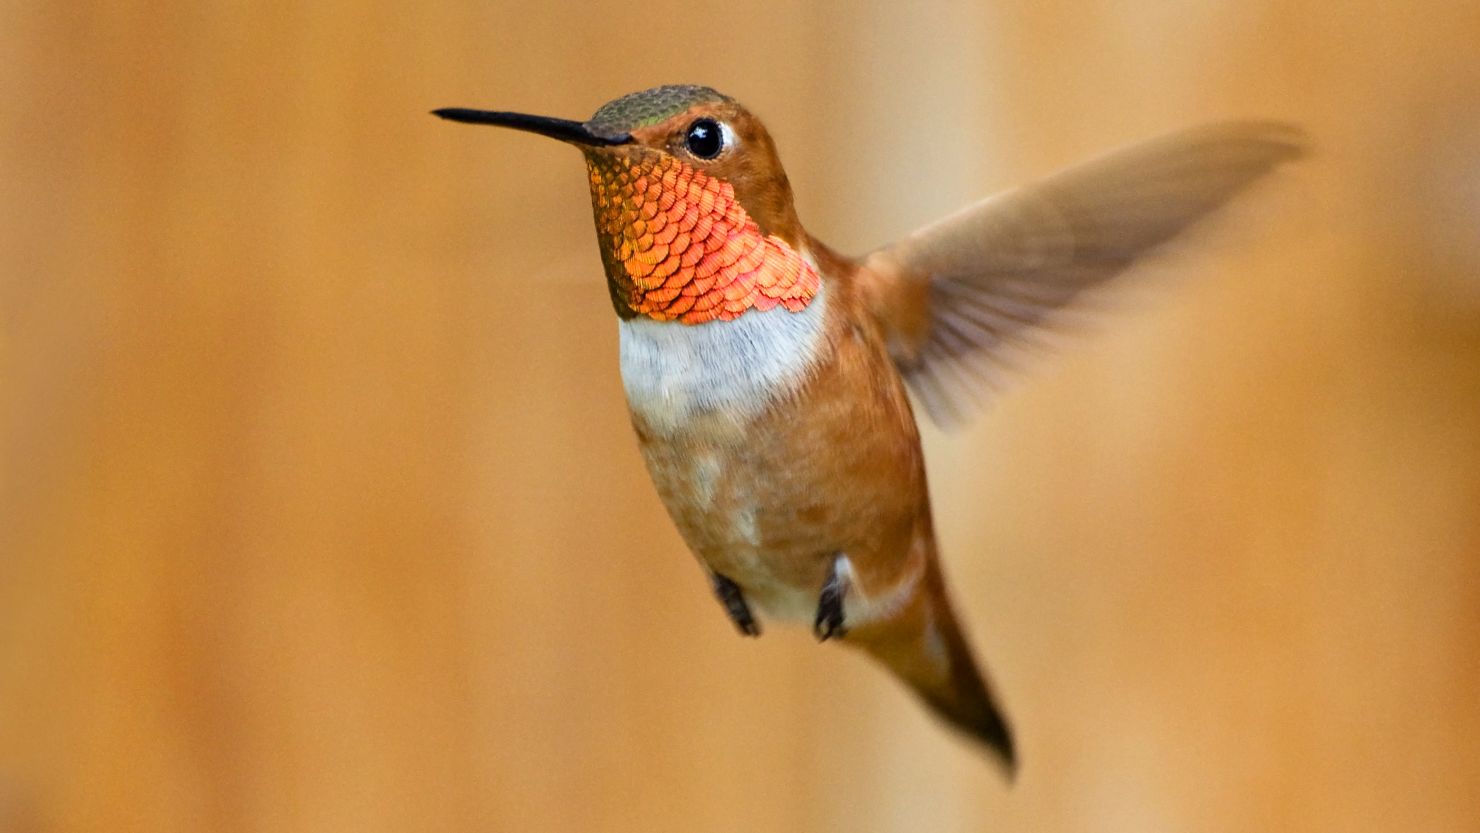 The Rufous Hummingbird has lost two-thirds of its population since 1970. 